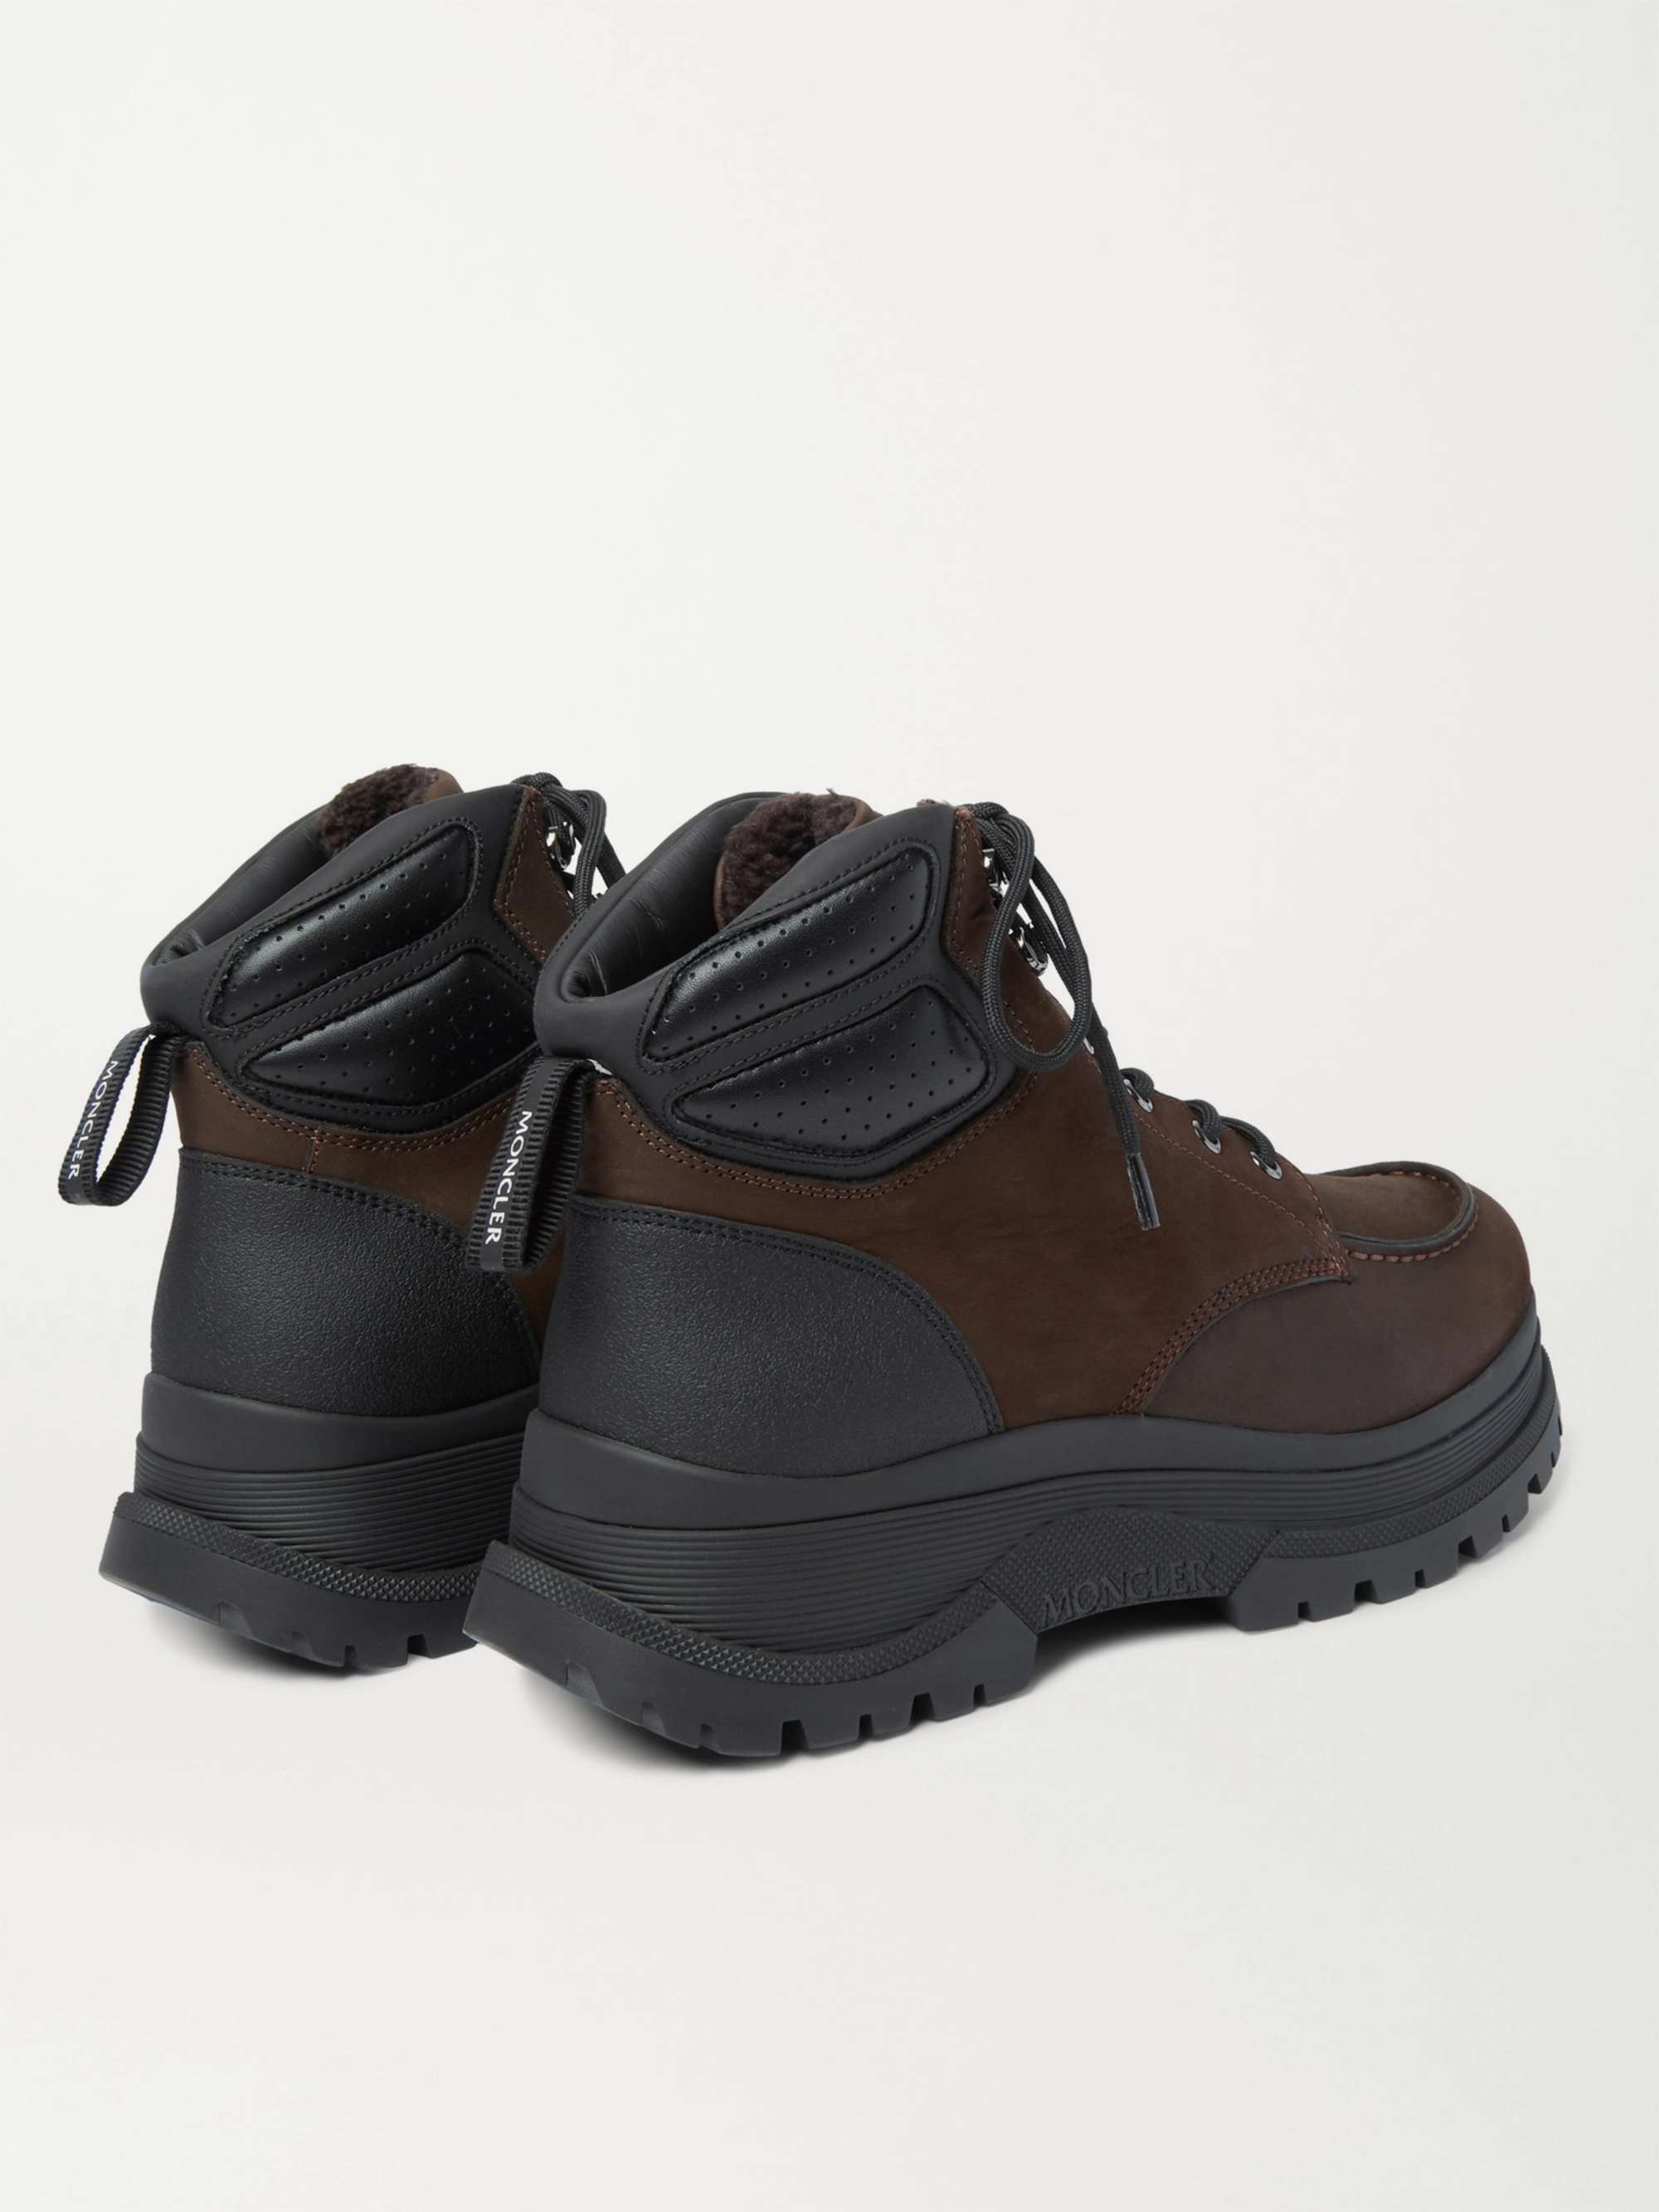 MONCLER Ulderic Leather-Trimmed Shearling-Lined Nubuck Boots